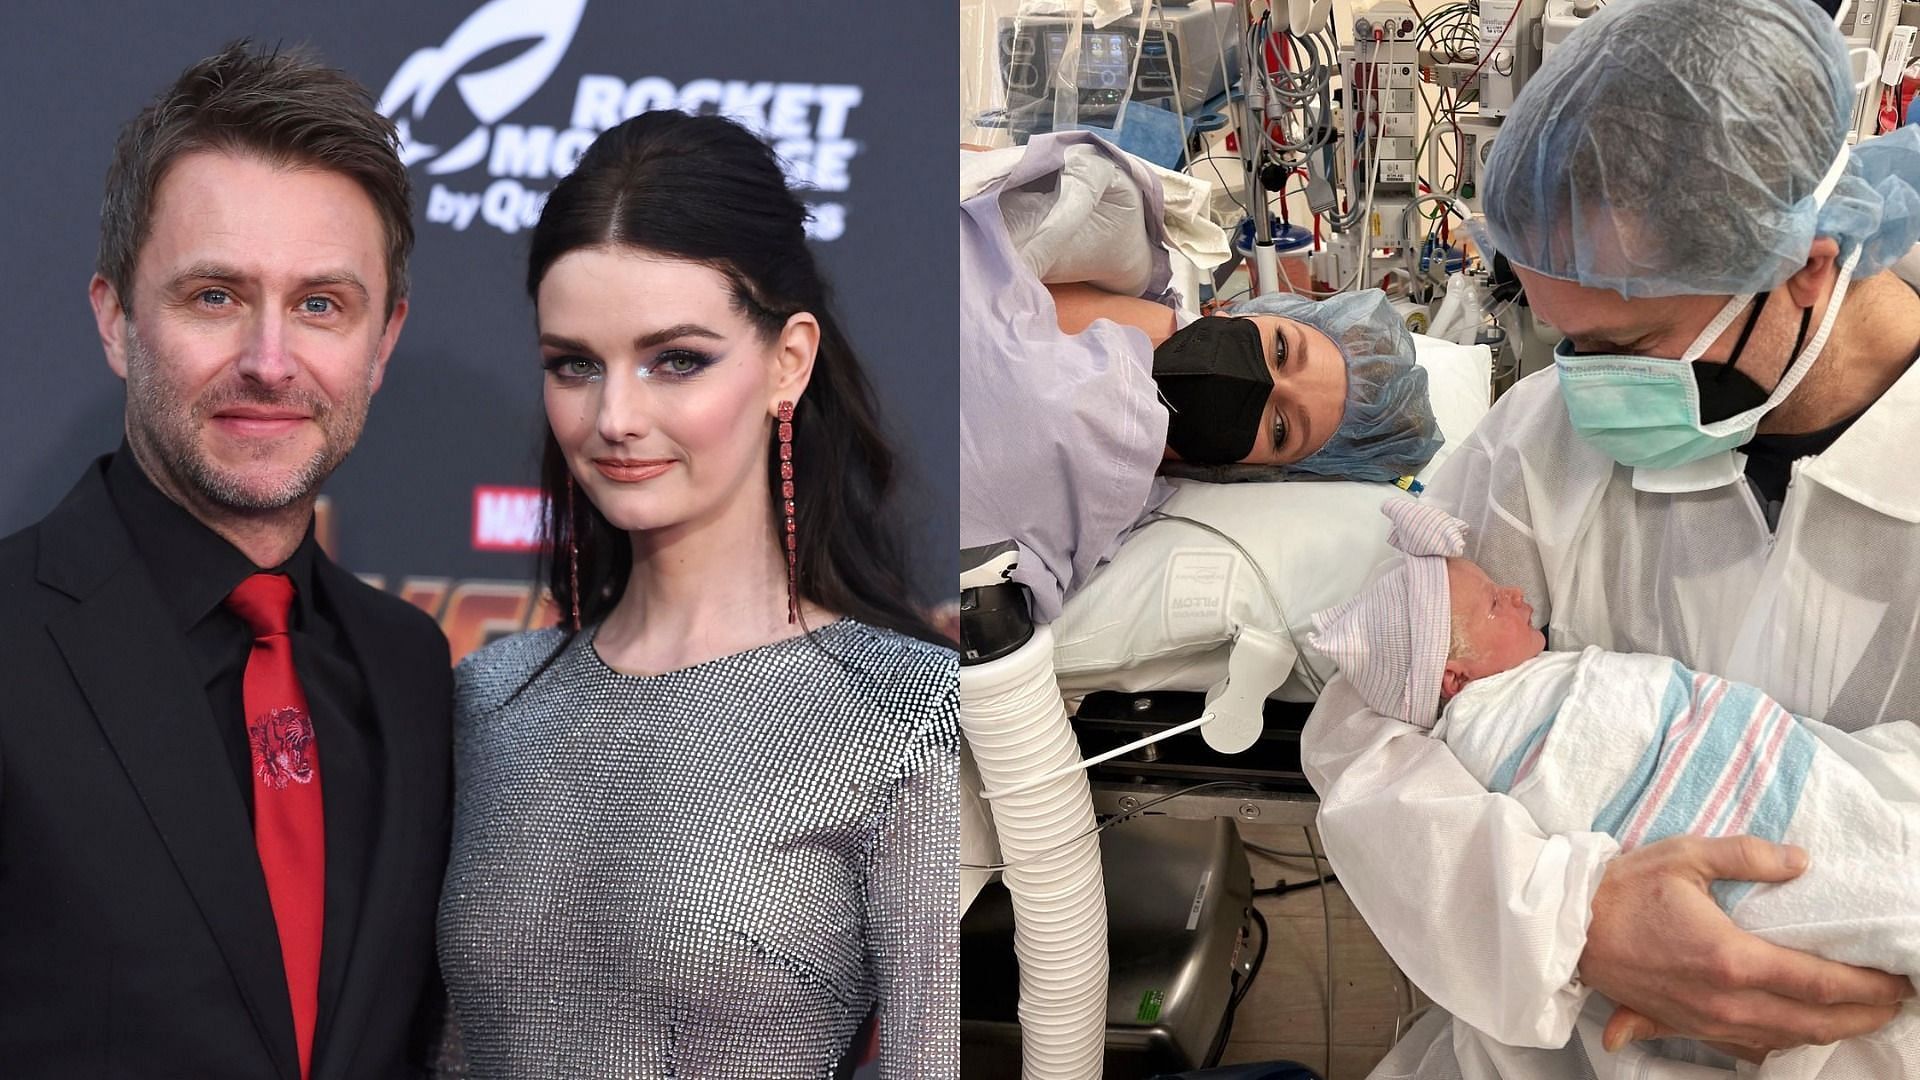 Chris Hardwick and Lydia Hearst are now parents to a baby girl (Images via Shutterstock and Instagram)